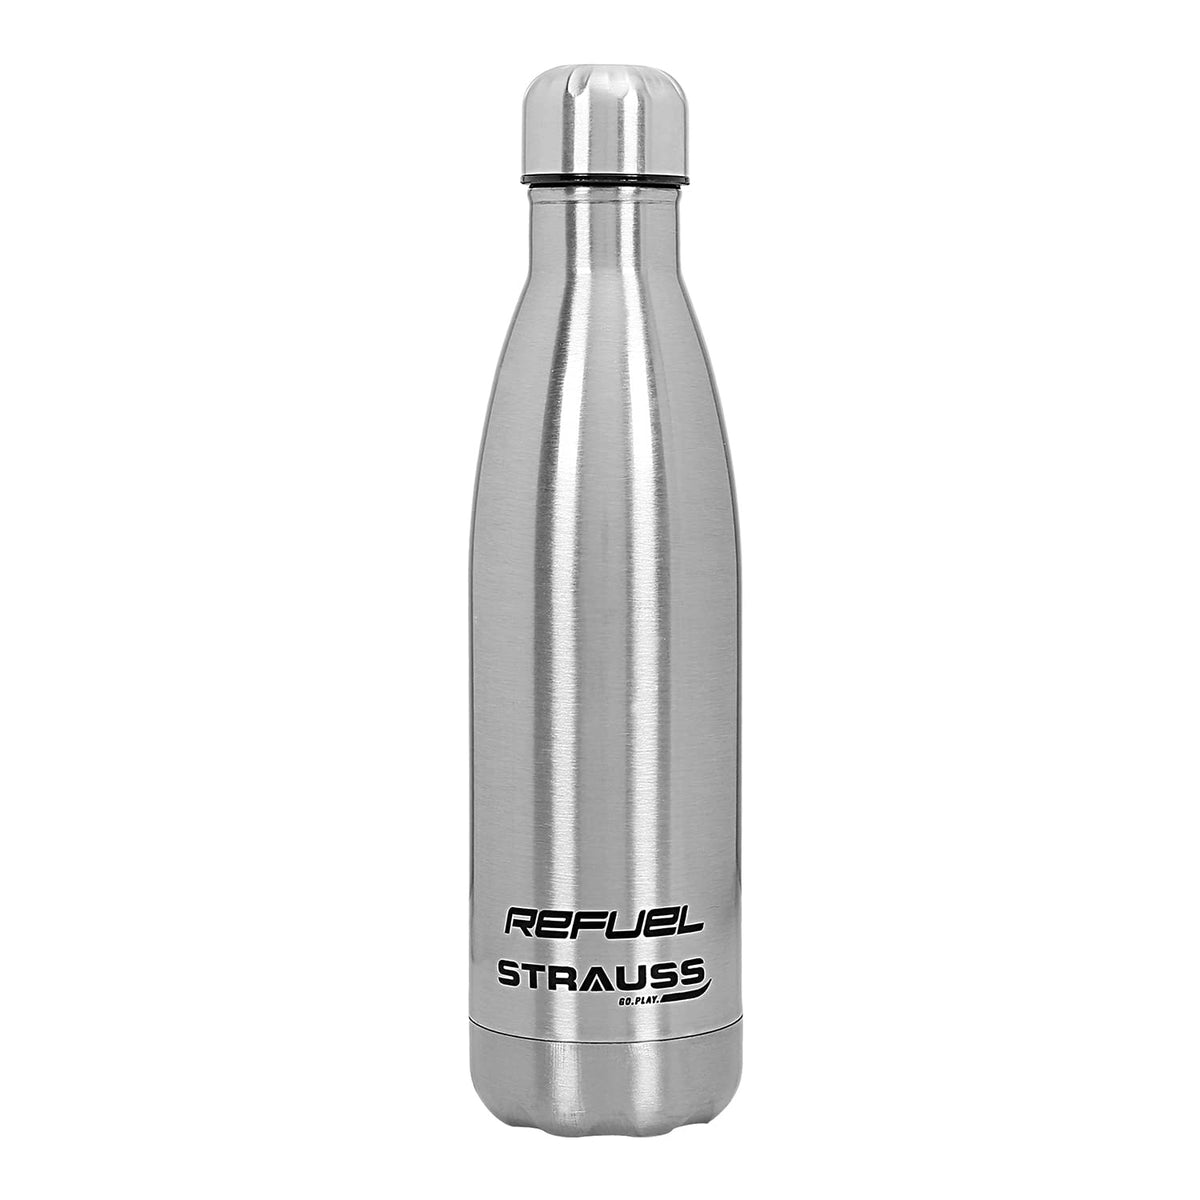 Strauss Refuel Steel Water Bottle | Leak Proof & Rust Free | Ideal for Office, Gym, Sports, Kitchen, Hiking, Trekking & Travel | Vacuum Insulated,(Silver)